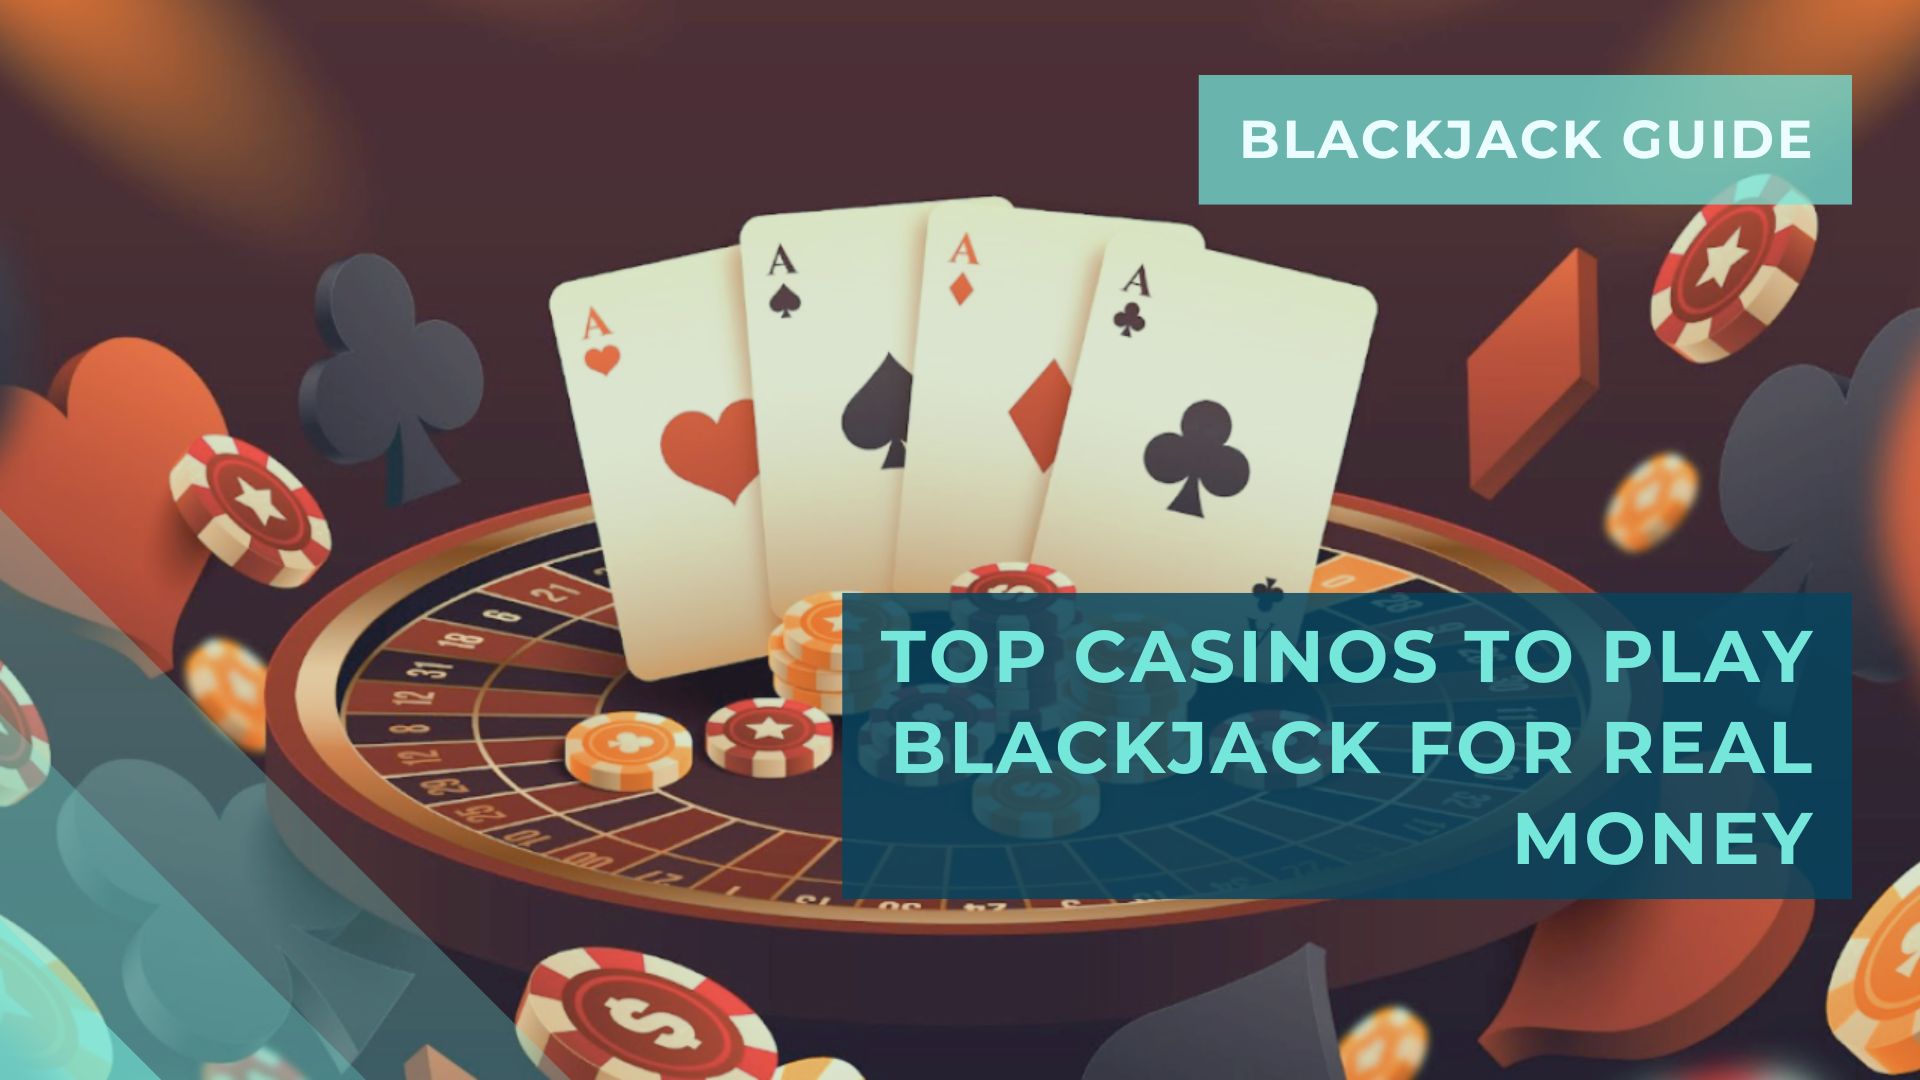 Top casinos to play blackjack for real money